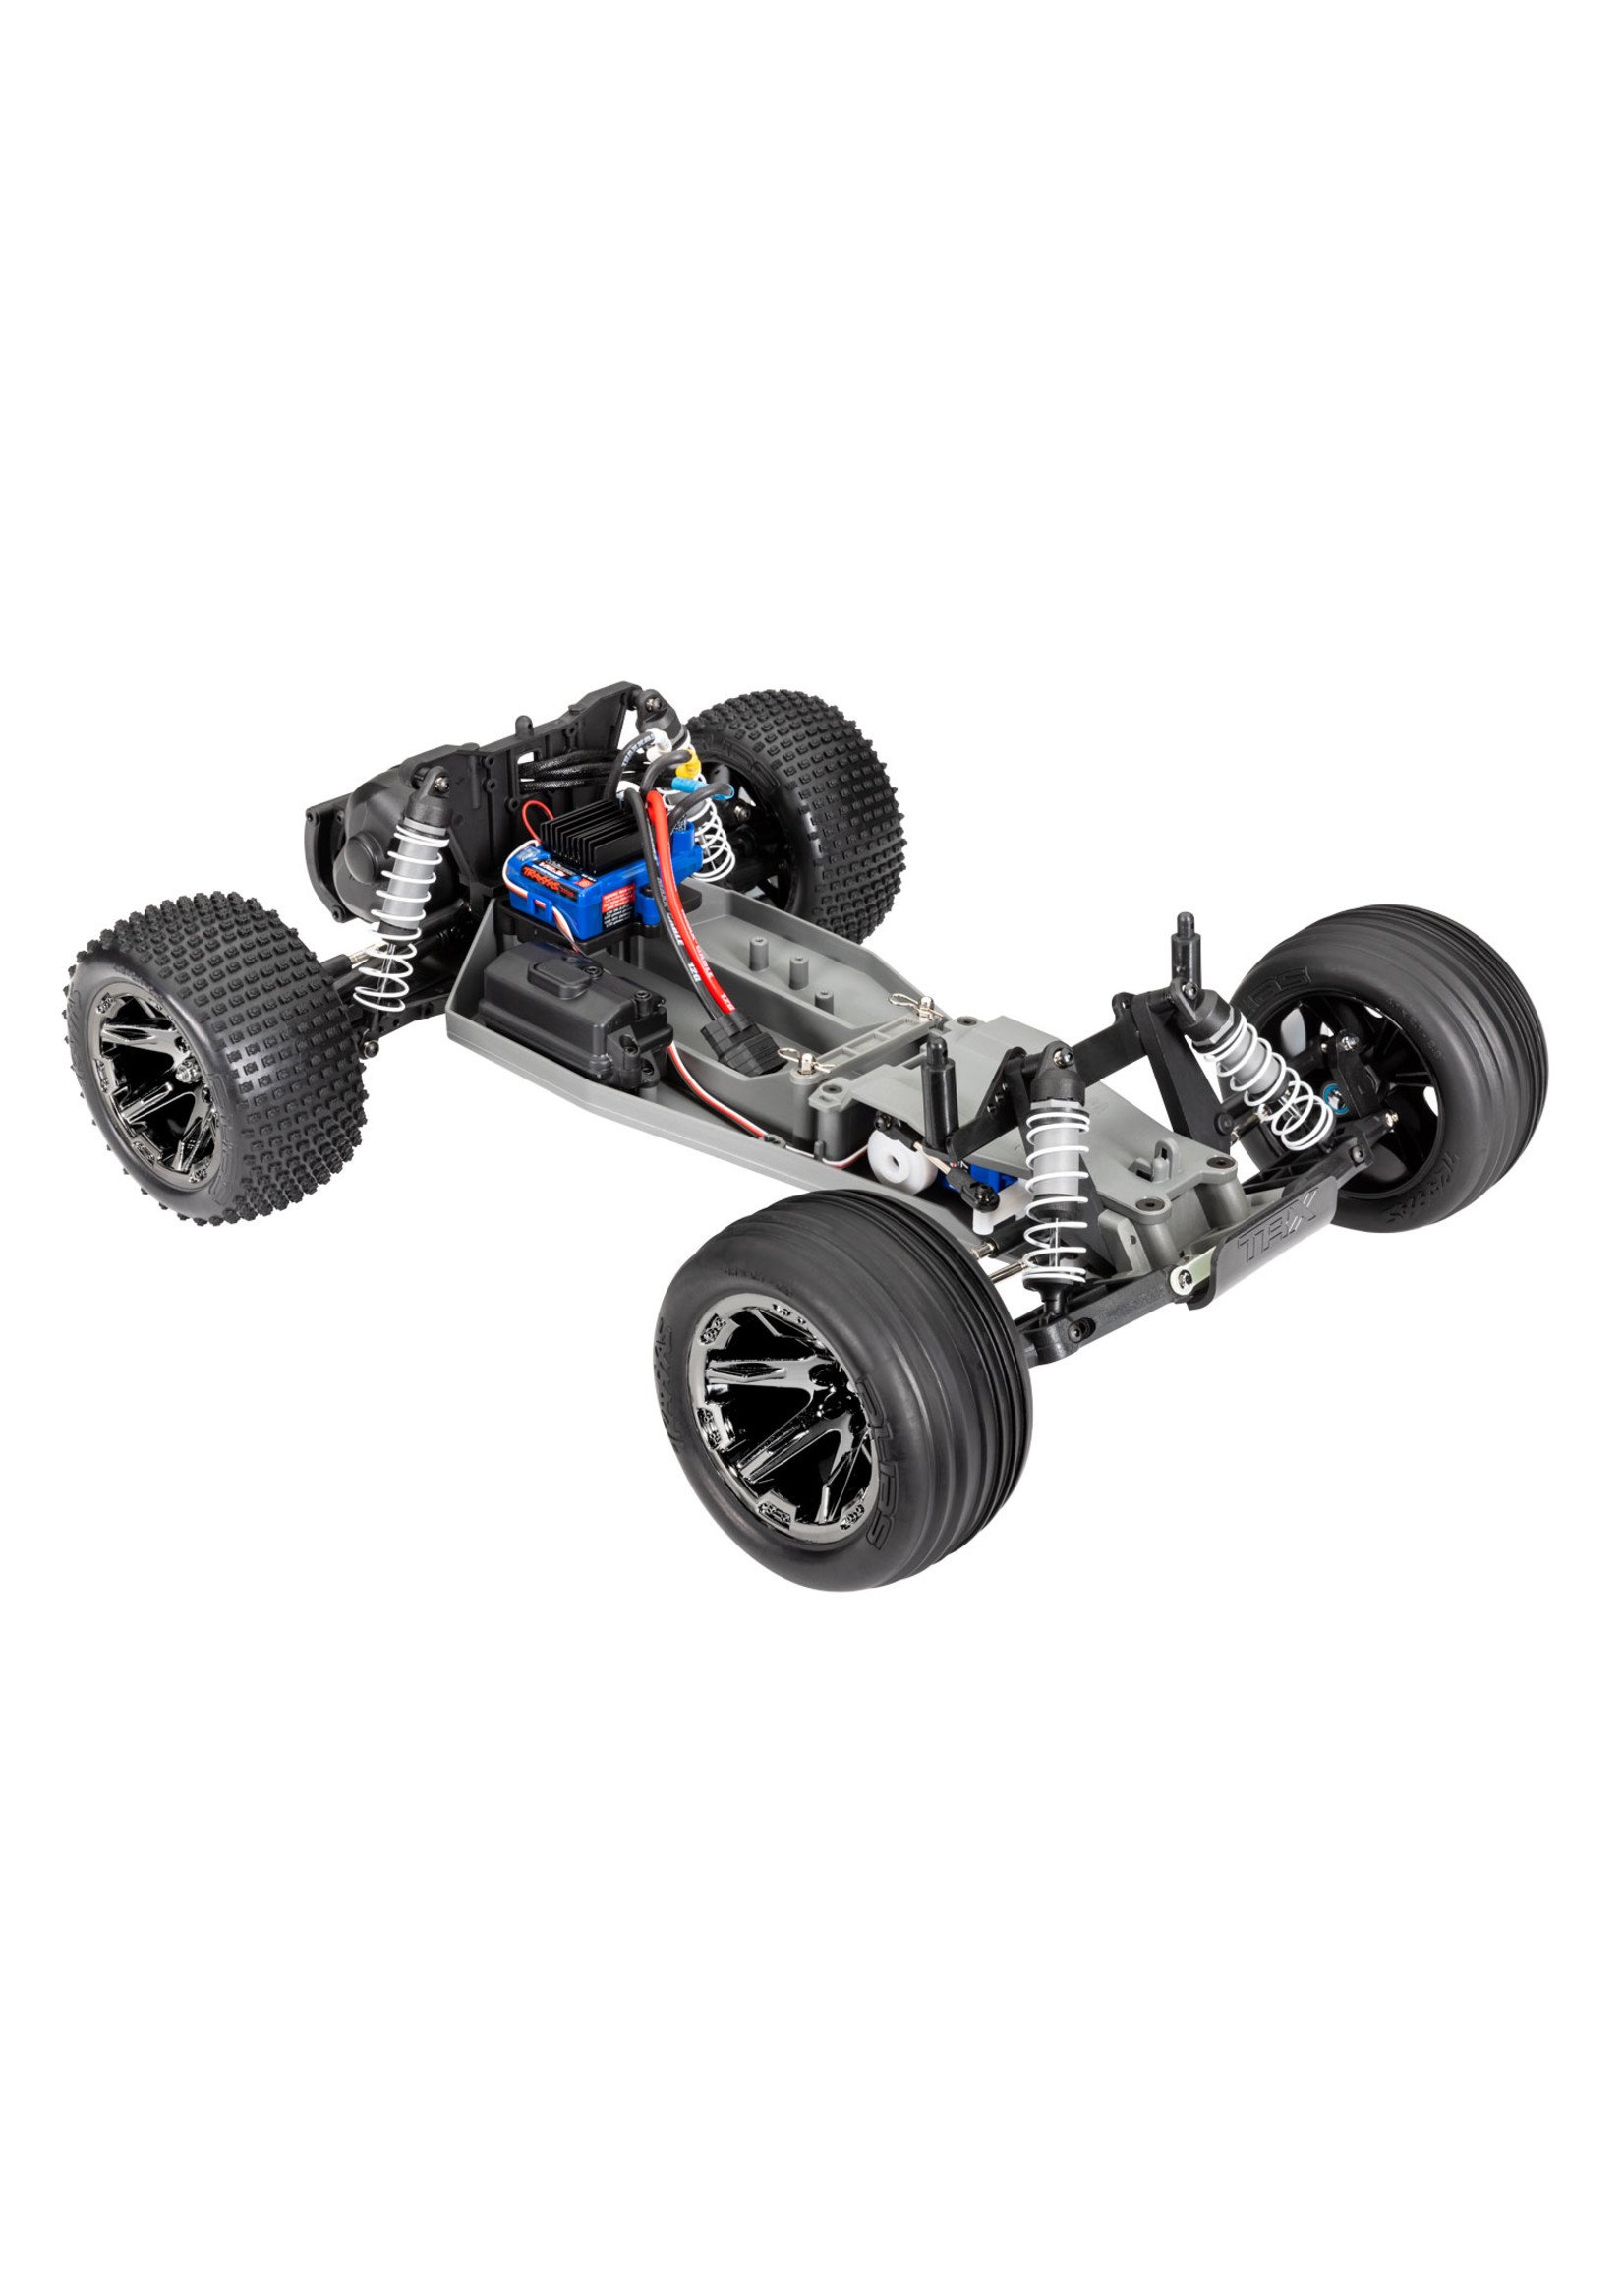 Traxxas 1/10 Rustler VXL 2WD RTR Stadium Truck with Magnum 272R - Red